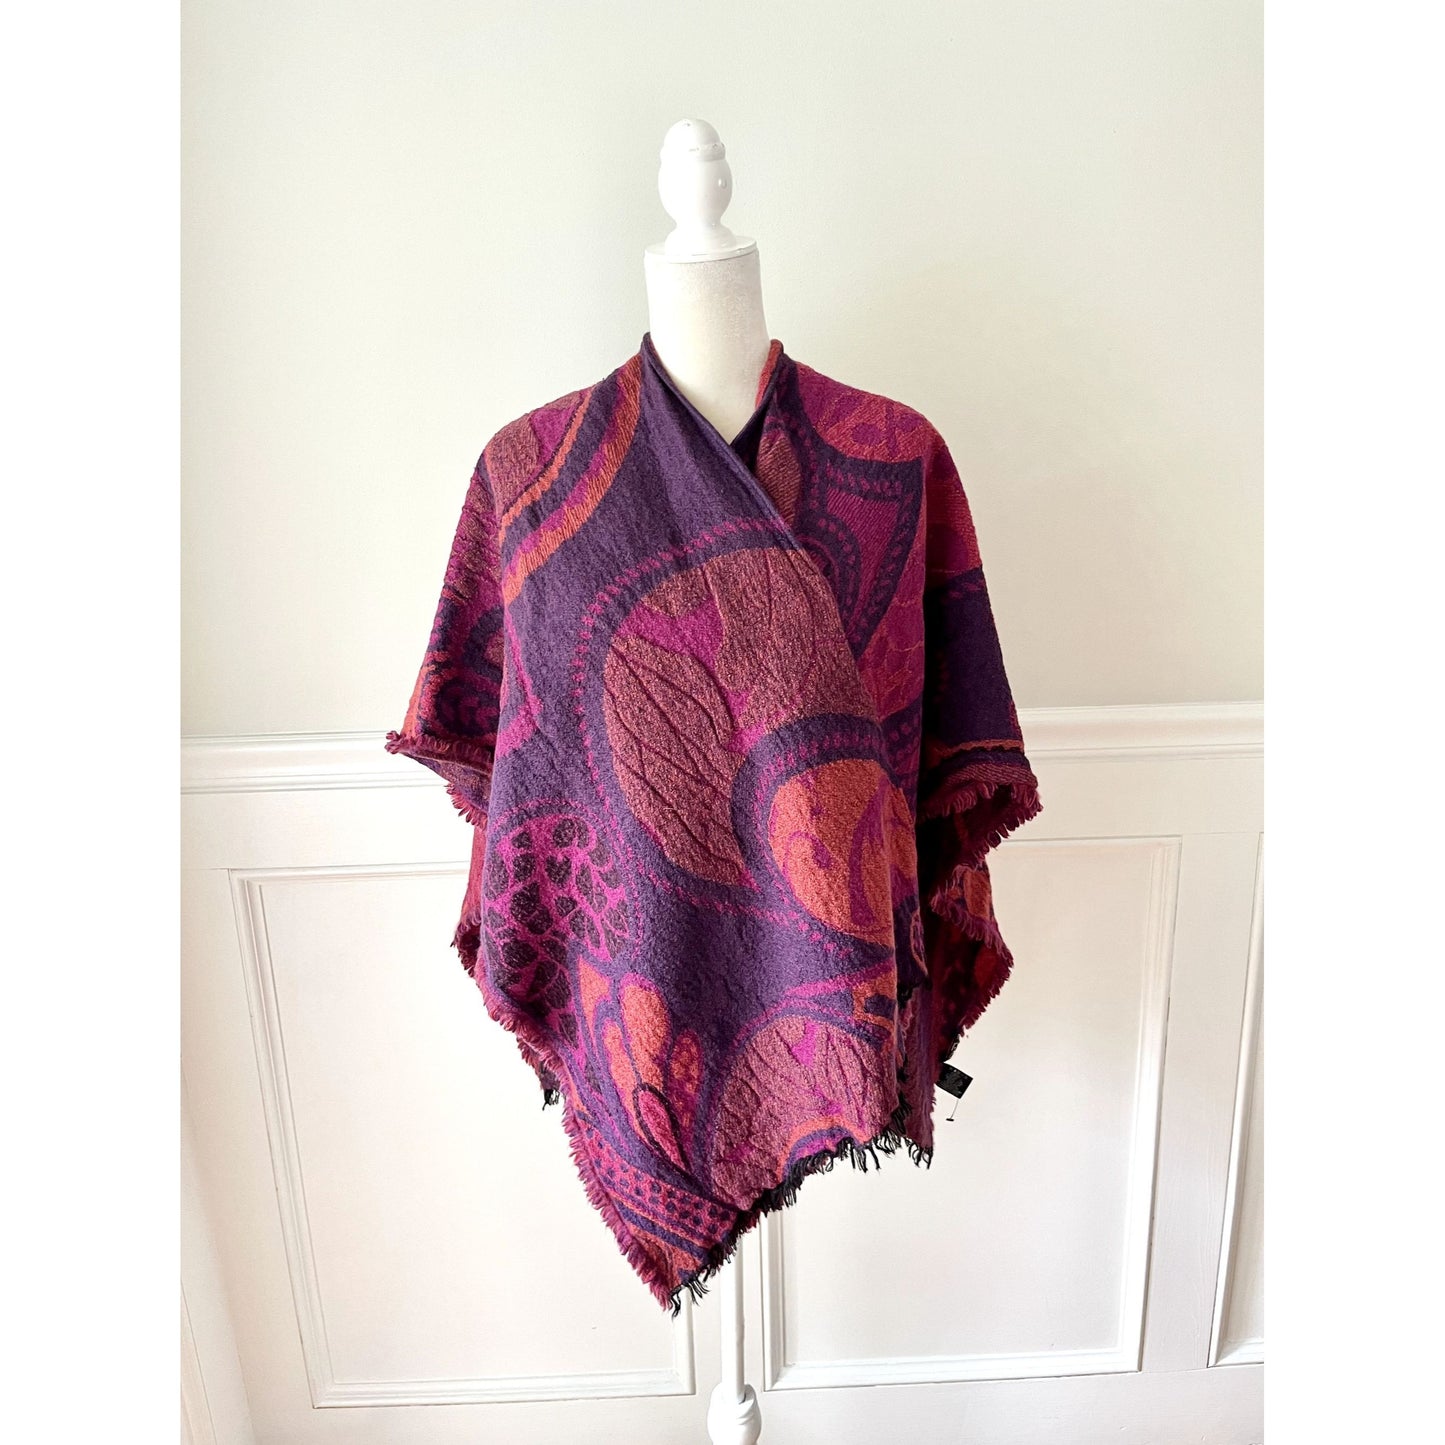 Etro Made in Italy Vibrant Wool Blend Fringed Wrap Cardigan